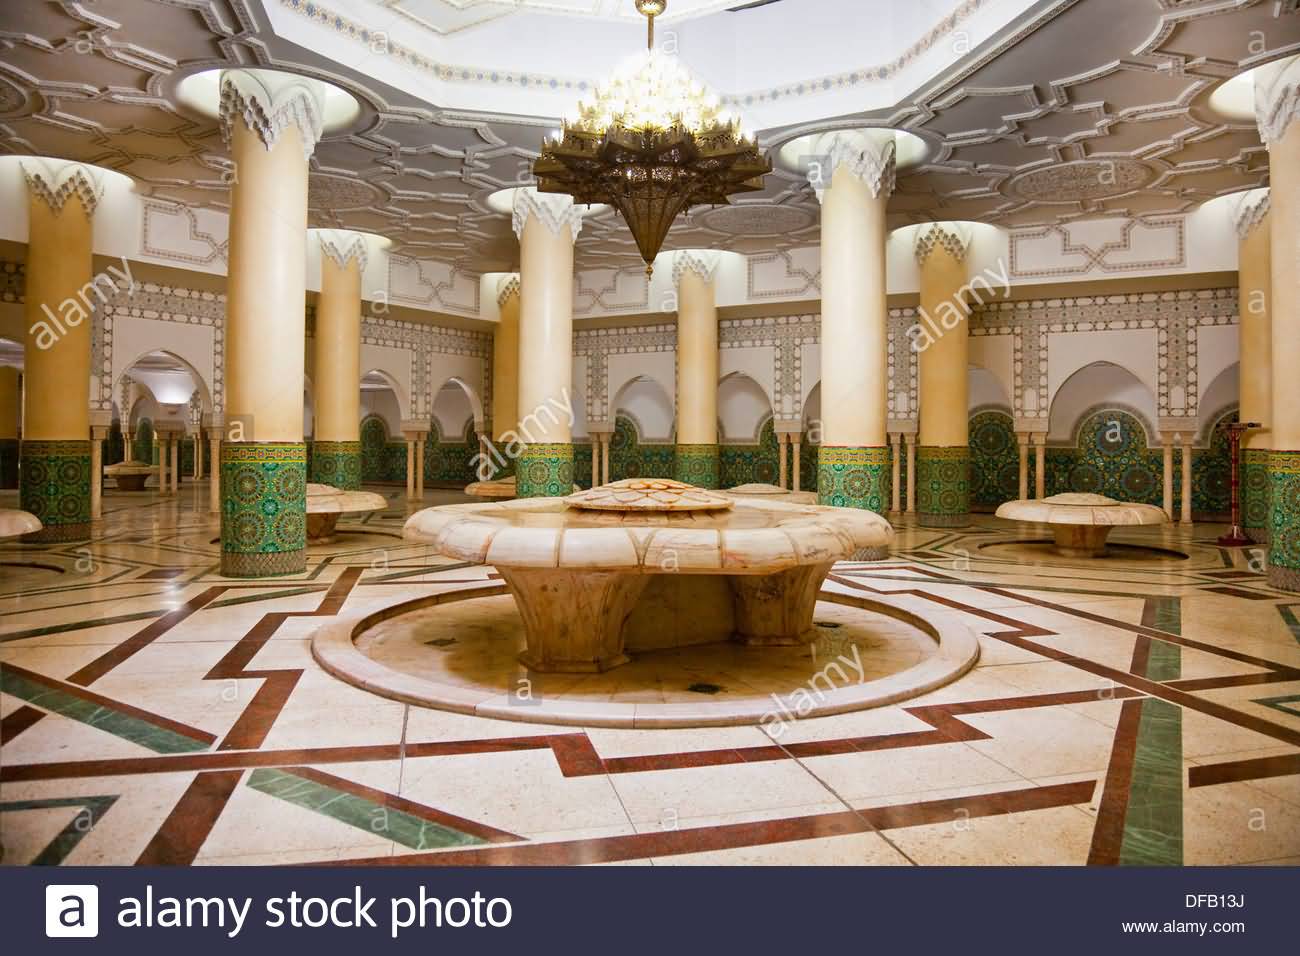 Ablution Fountains And Basins Of The Hassan II Mosque1300 x 956